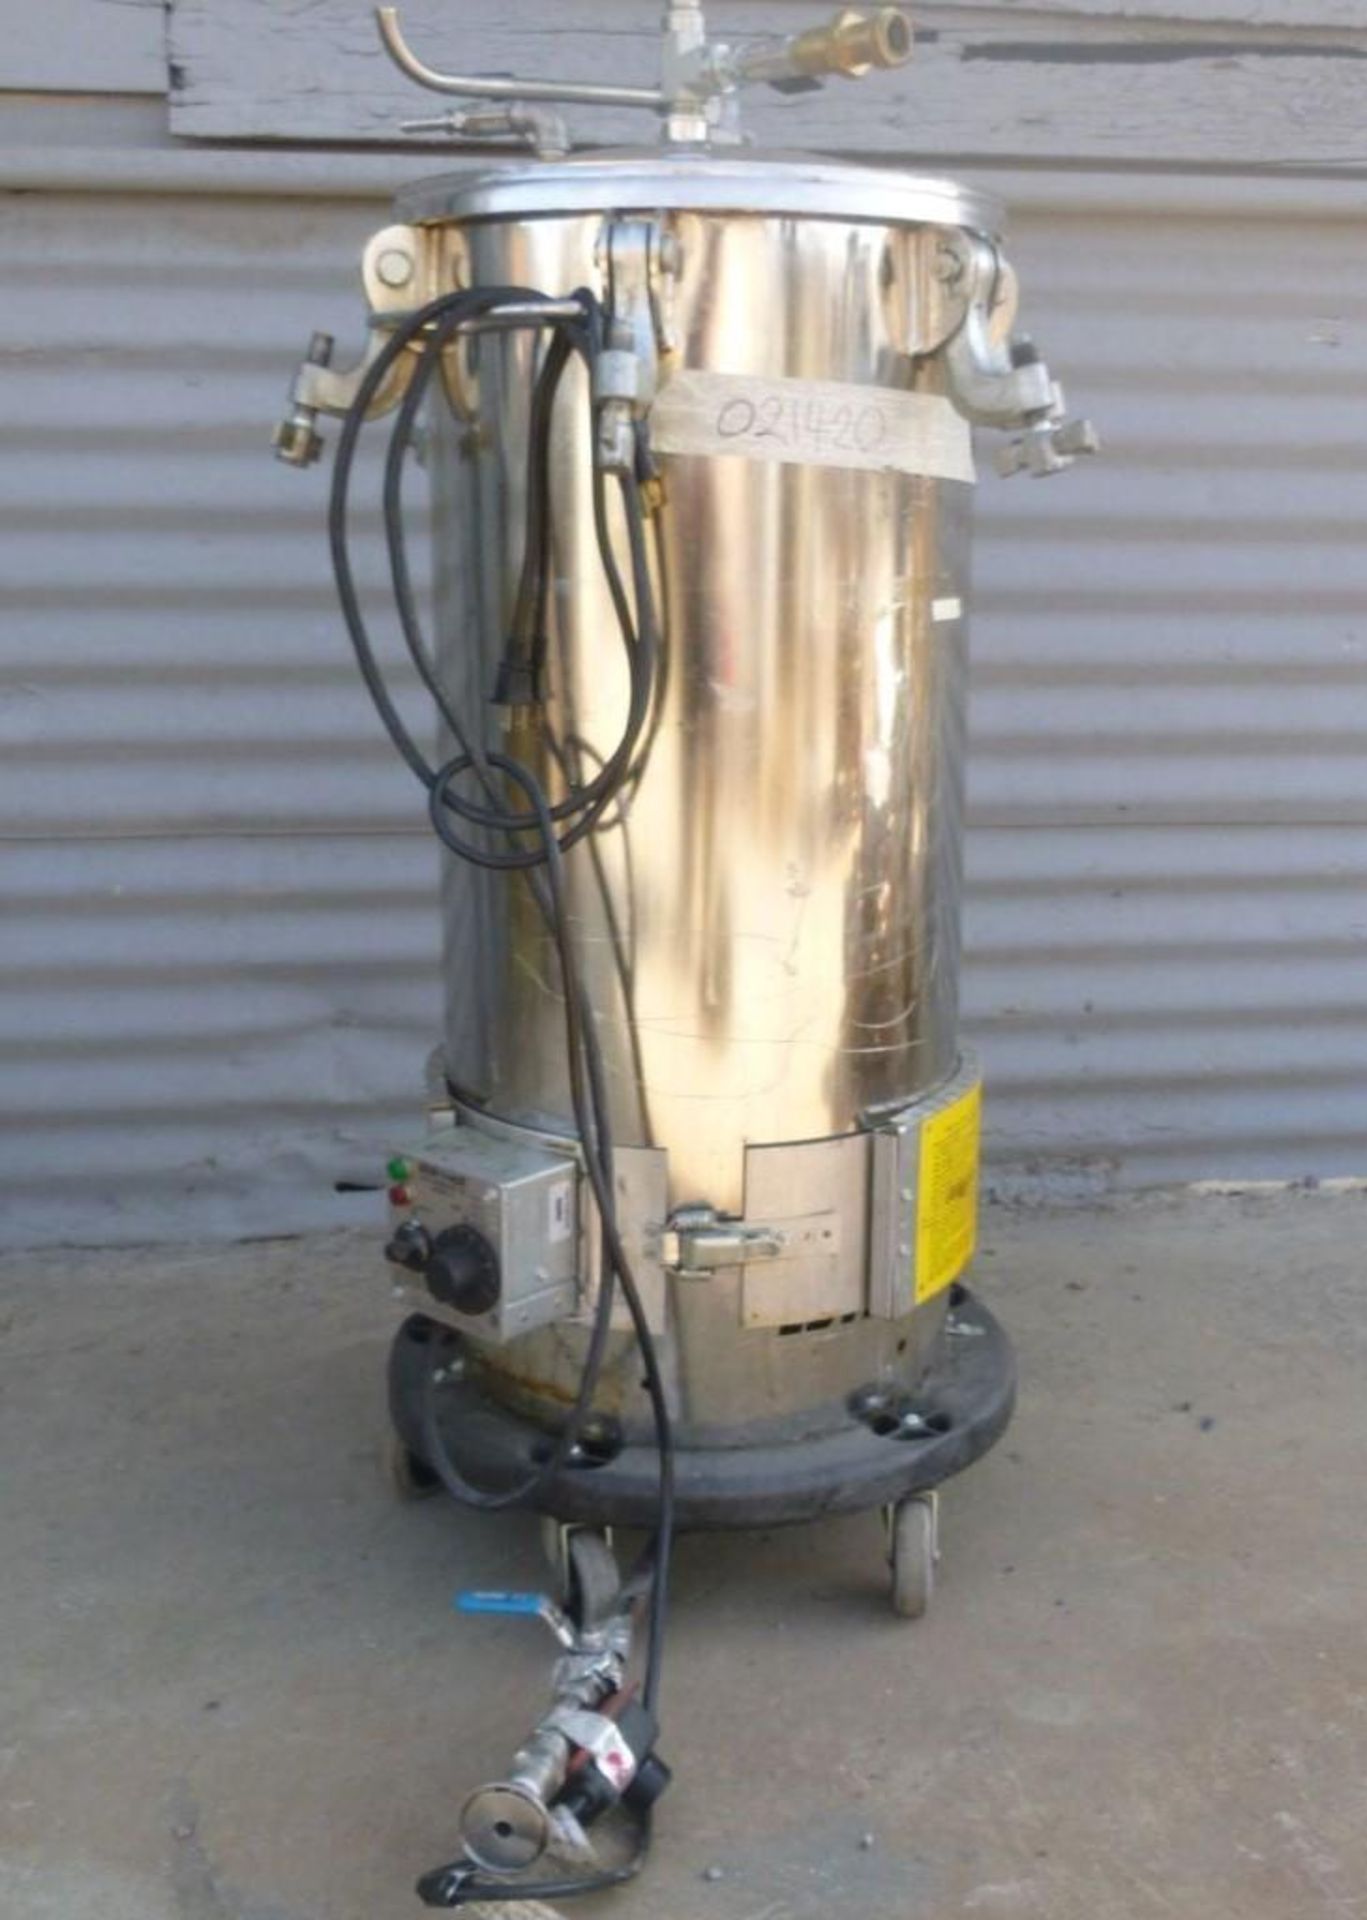 Tank, 15 Gallon, S/st, 110 PSI, 14" X 26.5", Binks, A #C744050 (Loading Cost = $50) - Image 6 of 6